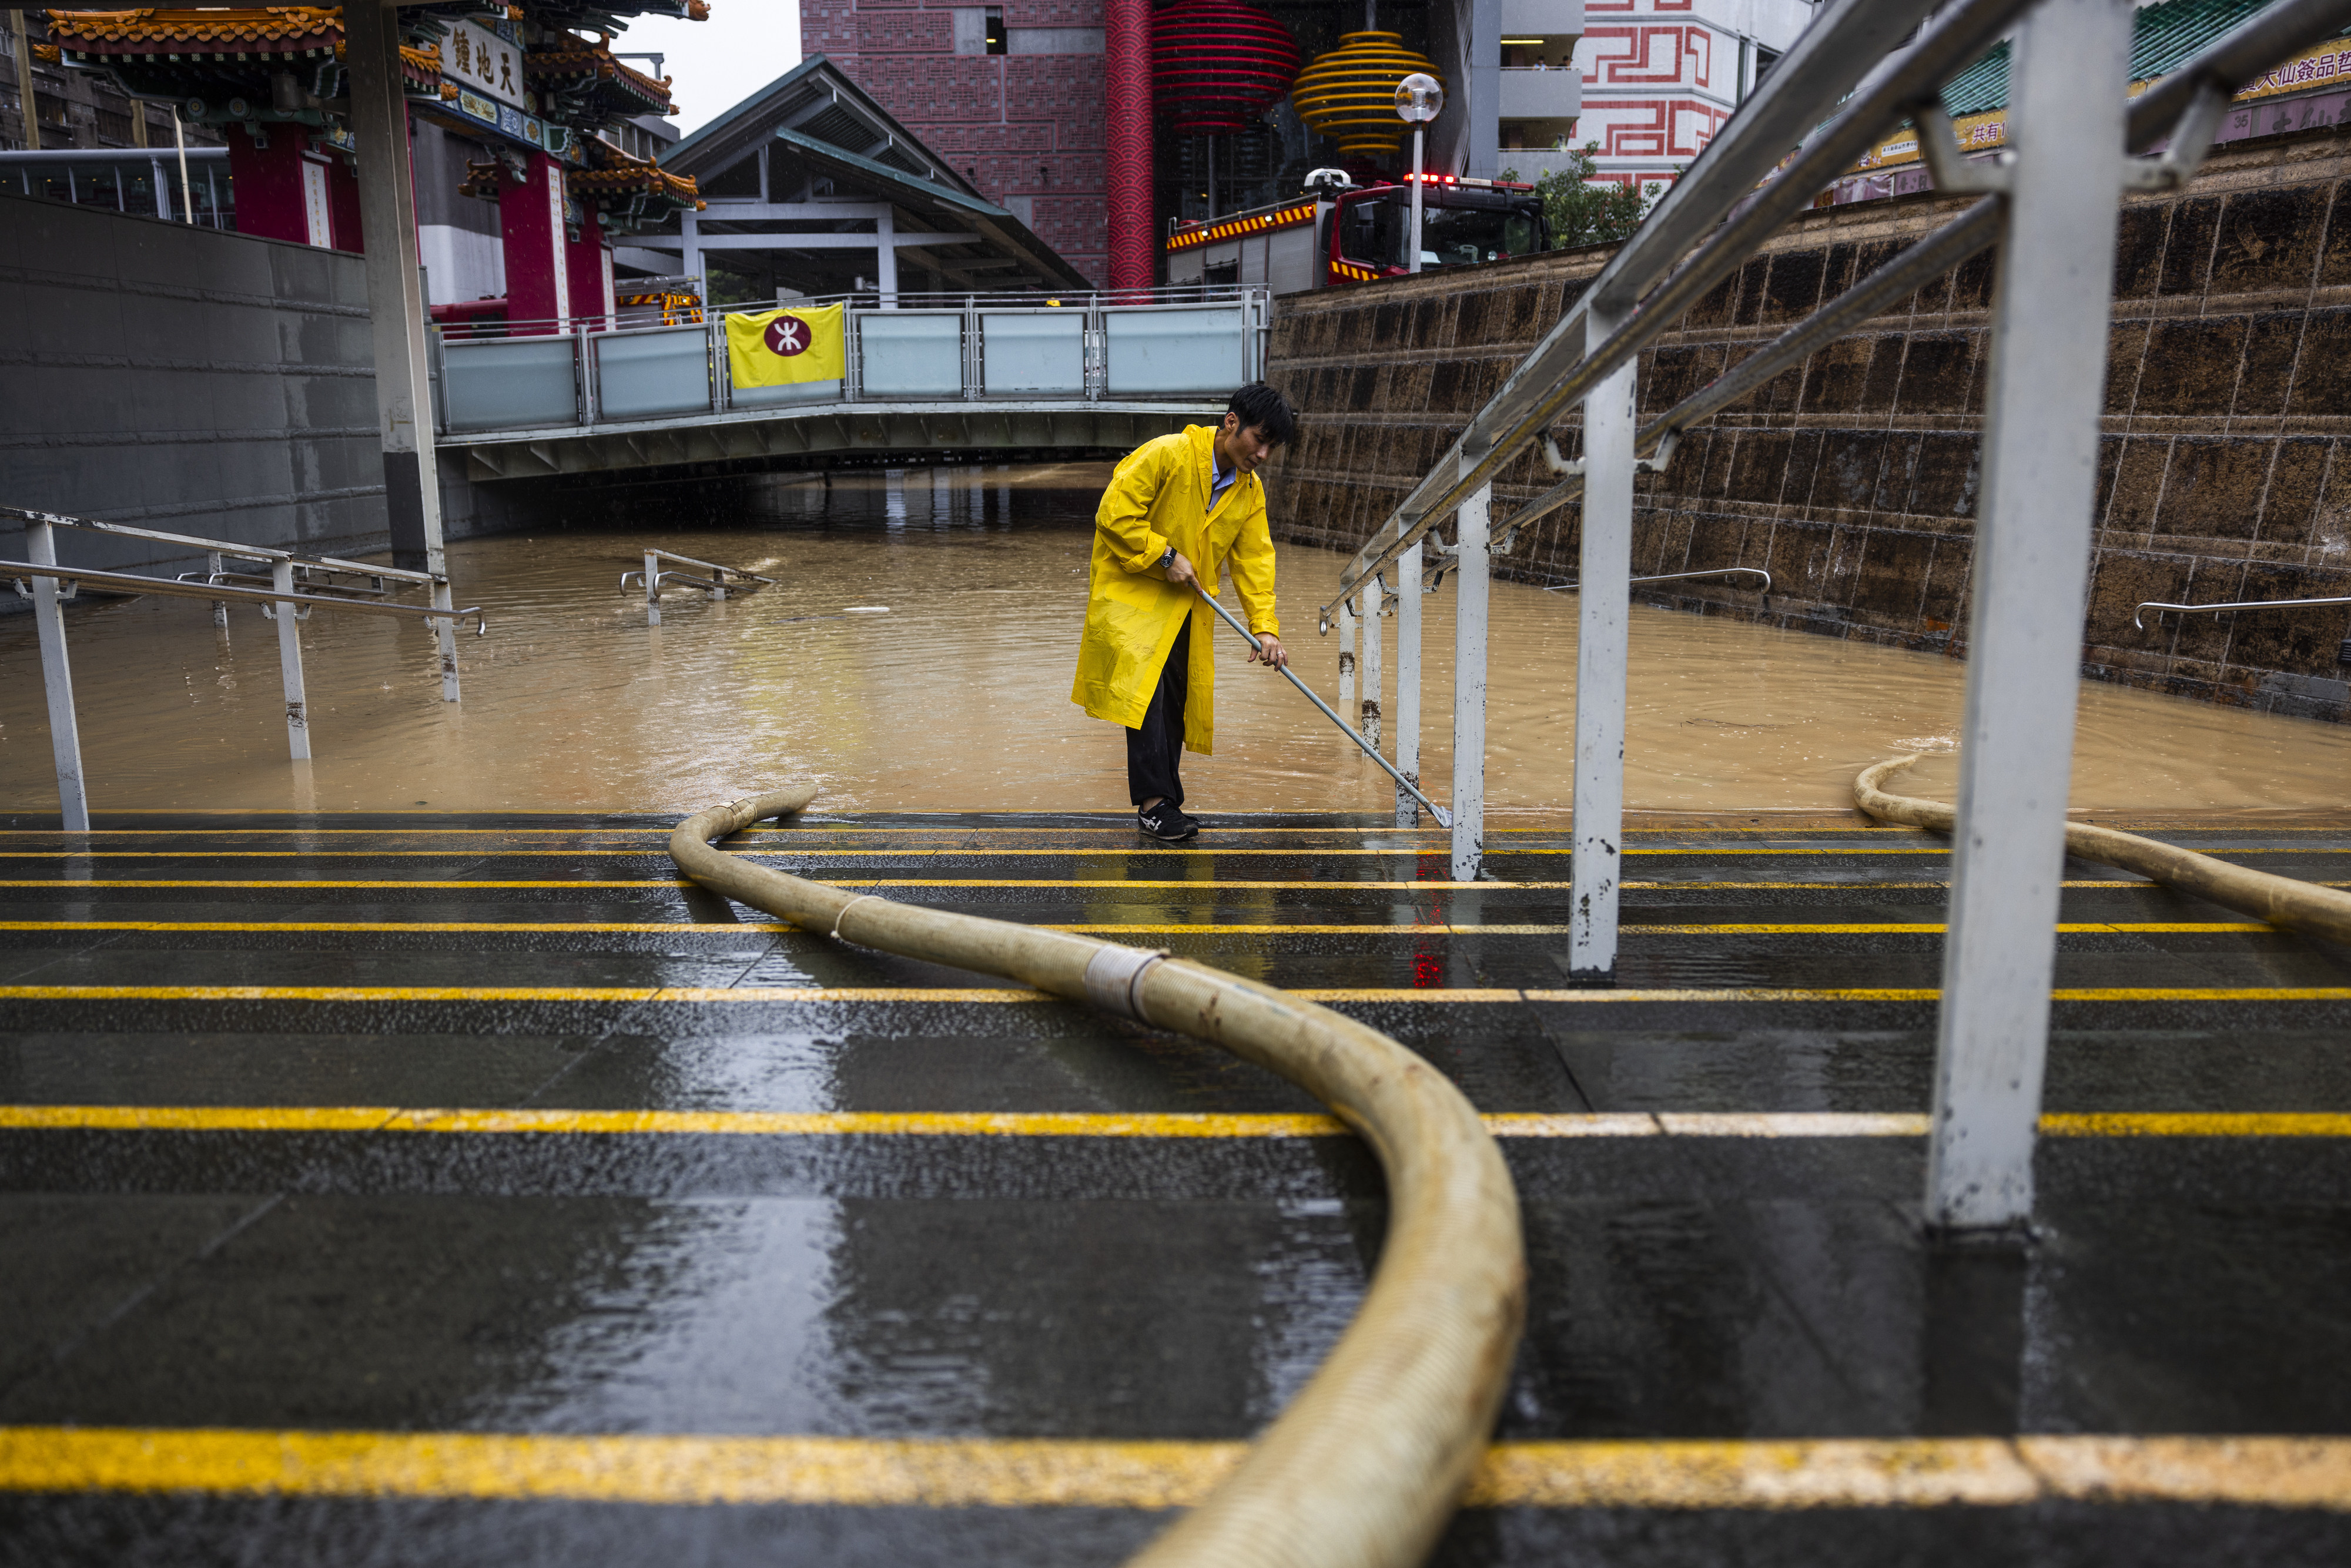 A worker clears water on a flooded street in Wong Tai Sin following heavy rain on September 8. With climate change bringing more severe weather events, cities like Hong Kong must step up action. Photo: AP 